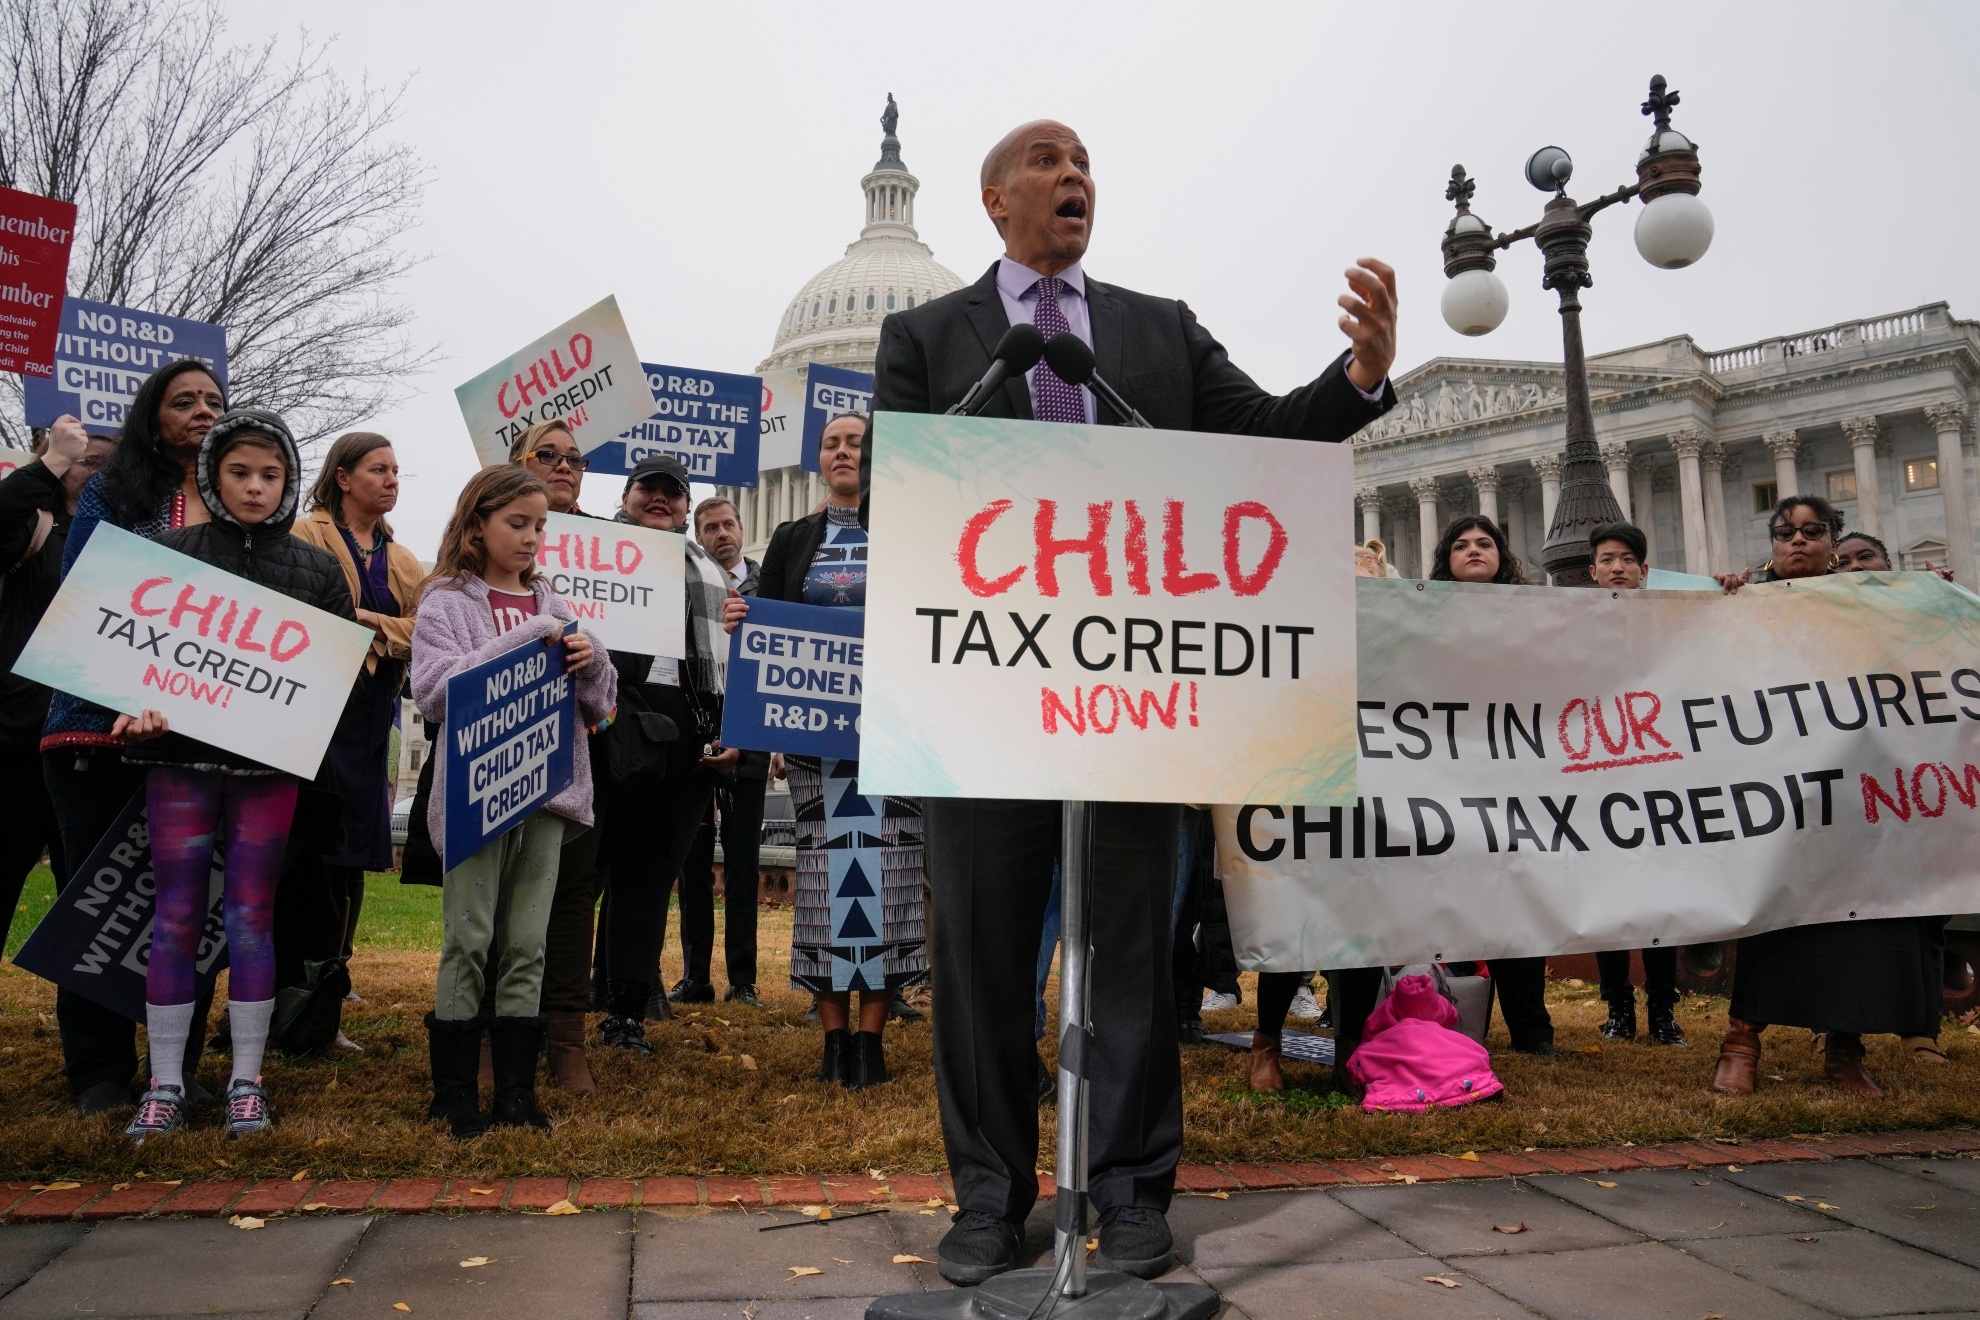 Protests for Child Tax Credit outside the Capitol.